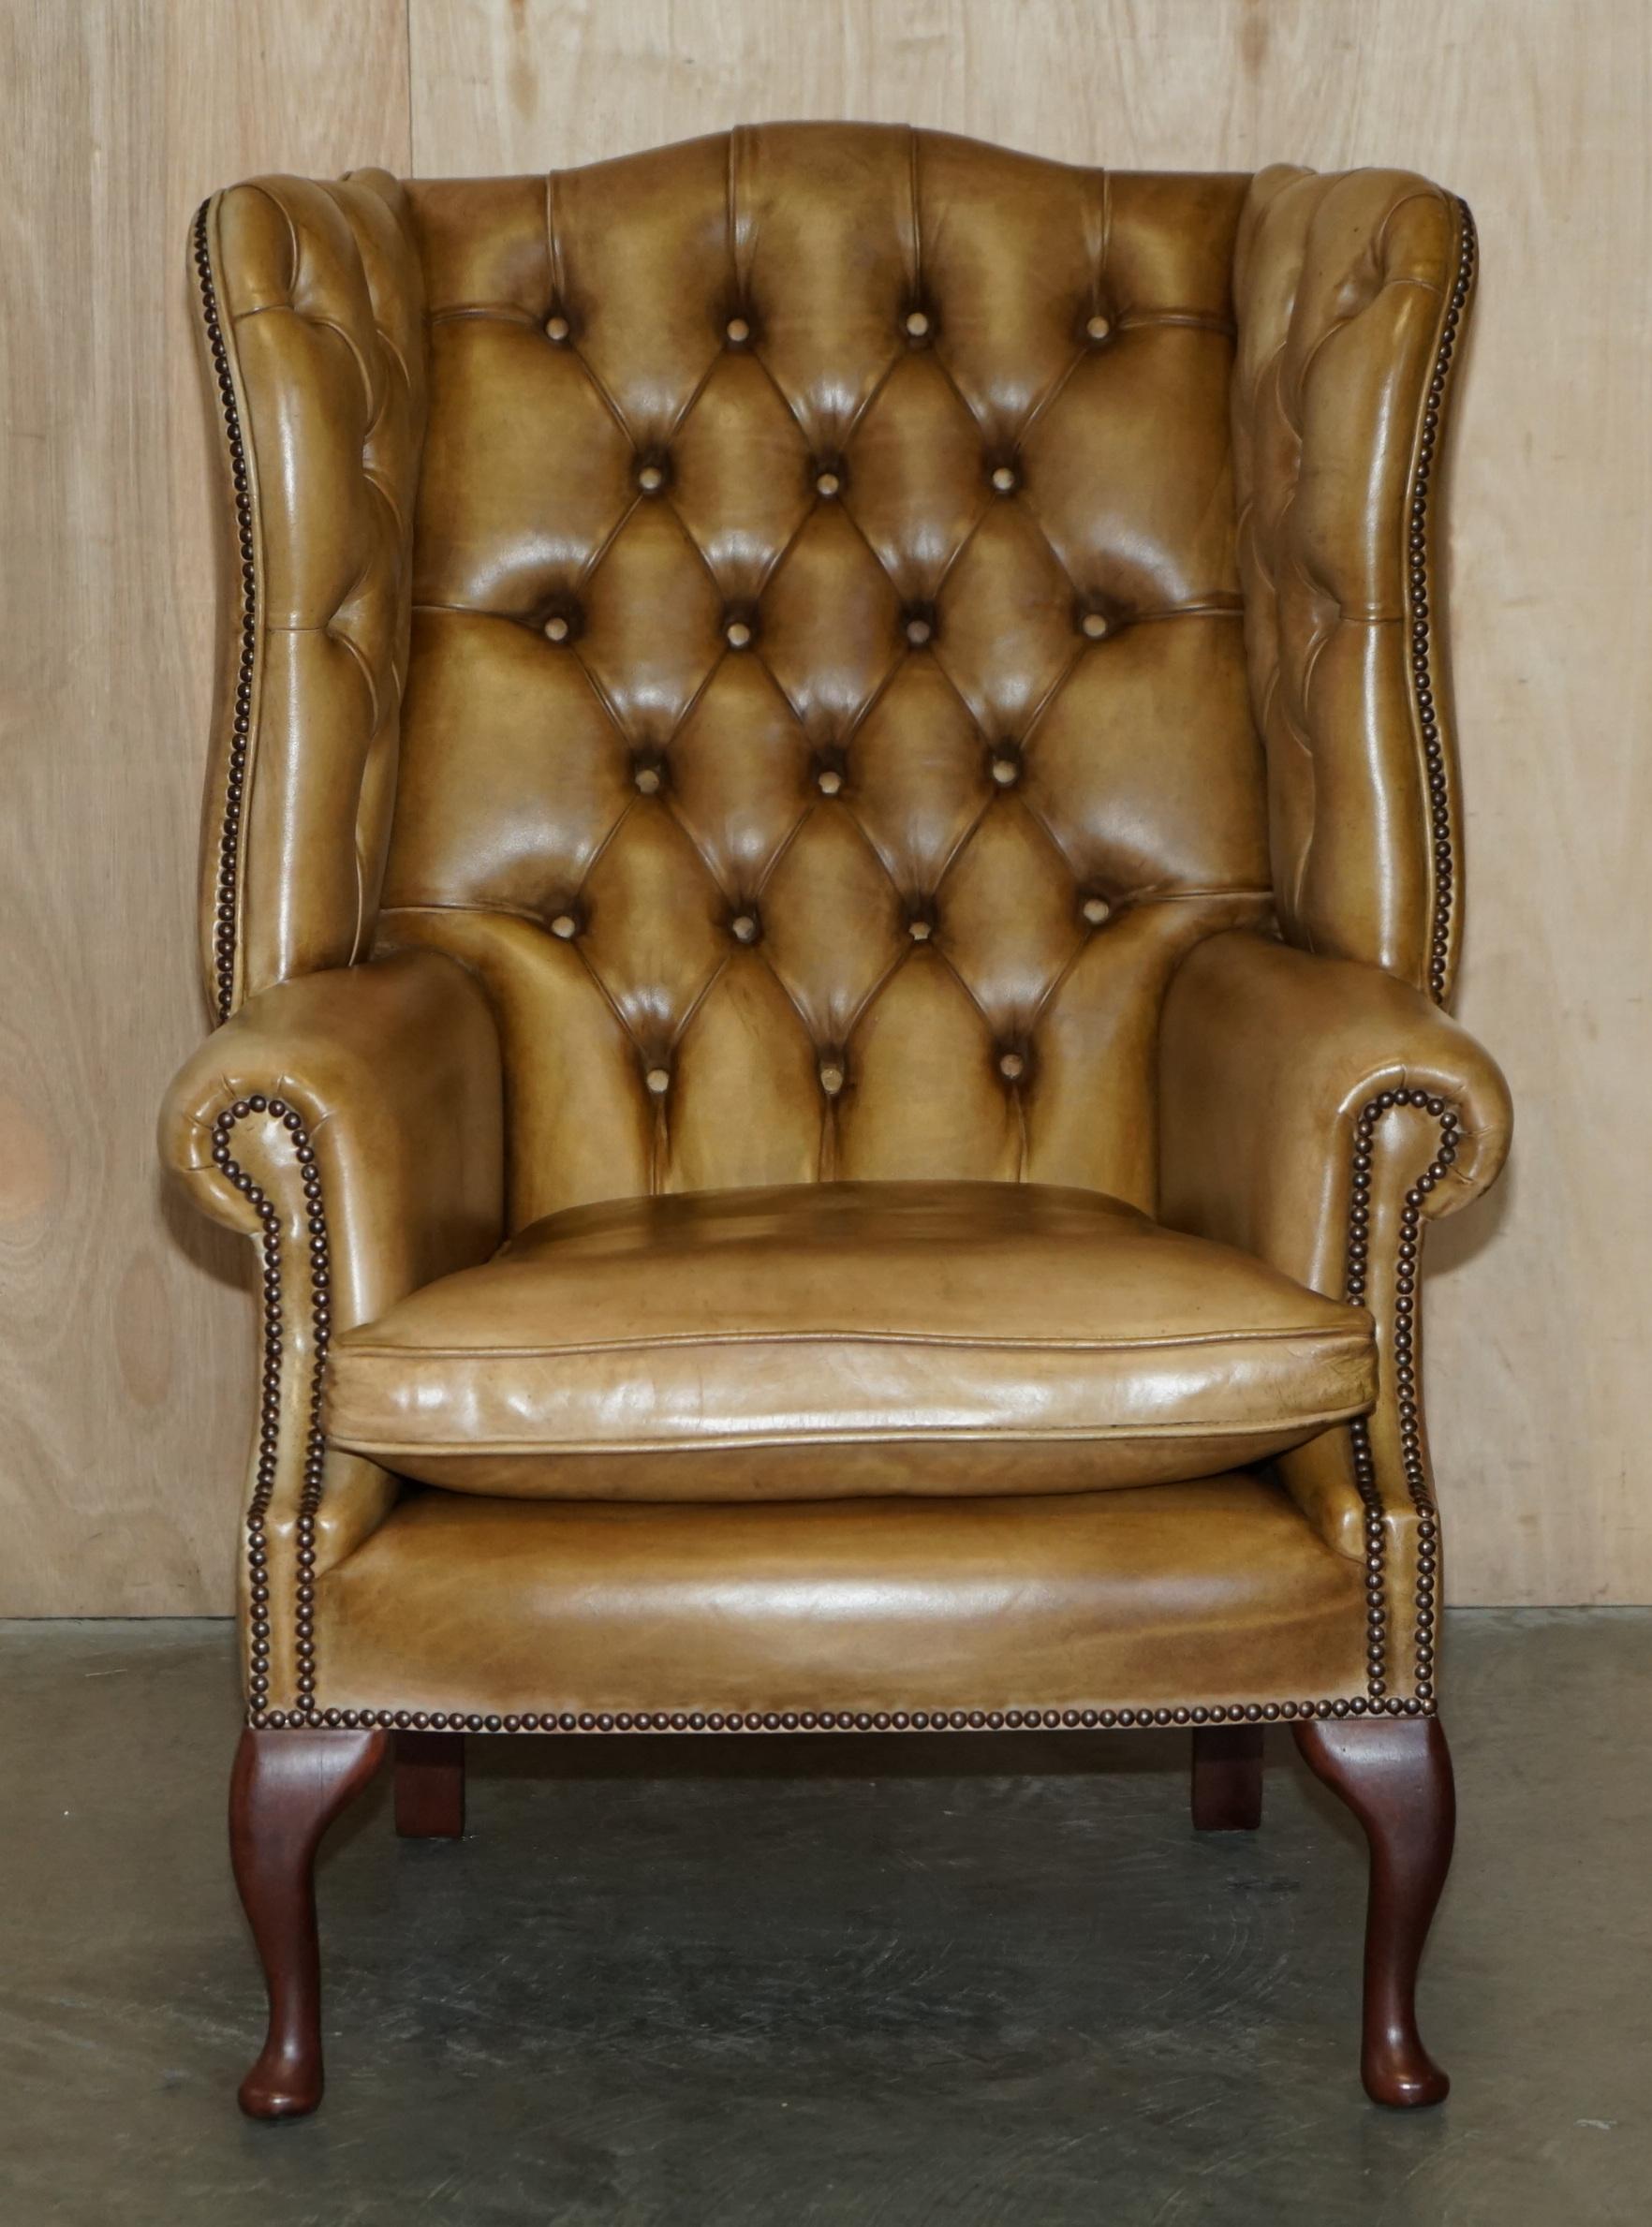 PAIR OF VINTAGE Tan BROWN LEATHER CHESTERFiELD WINGBACK CHAIRS WITH FOOTSTOOLS (Englisch) im Angebot